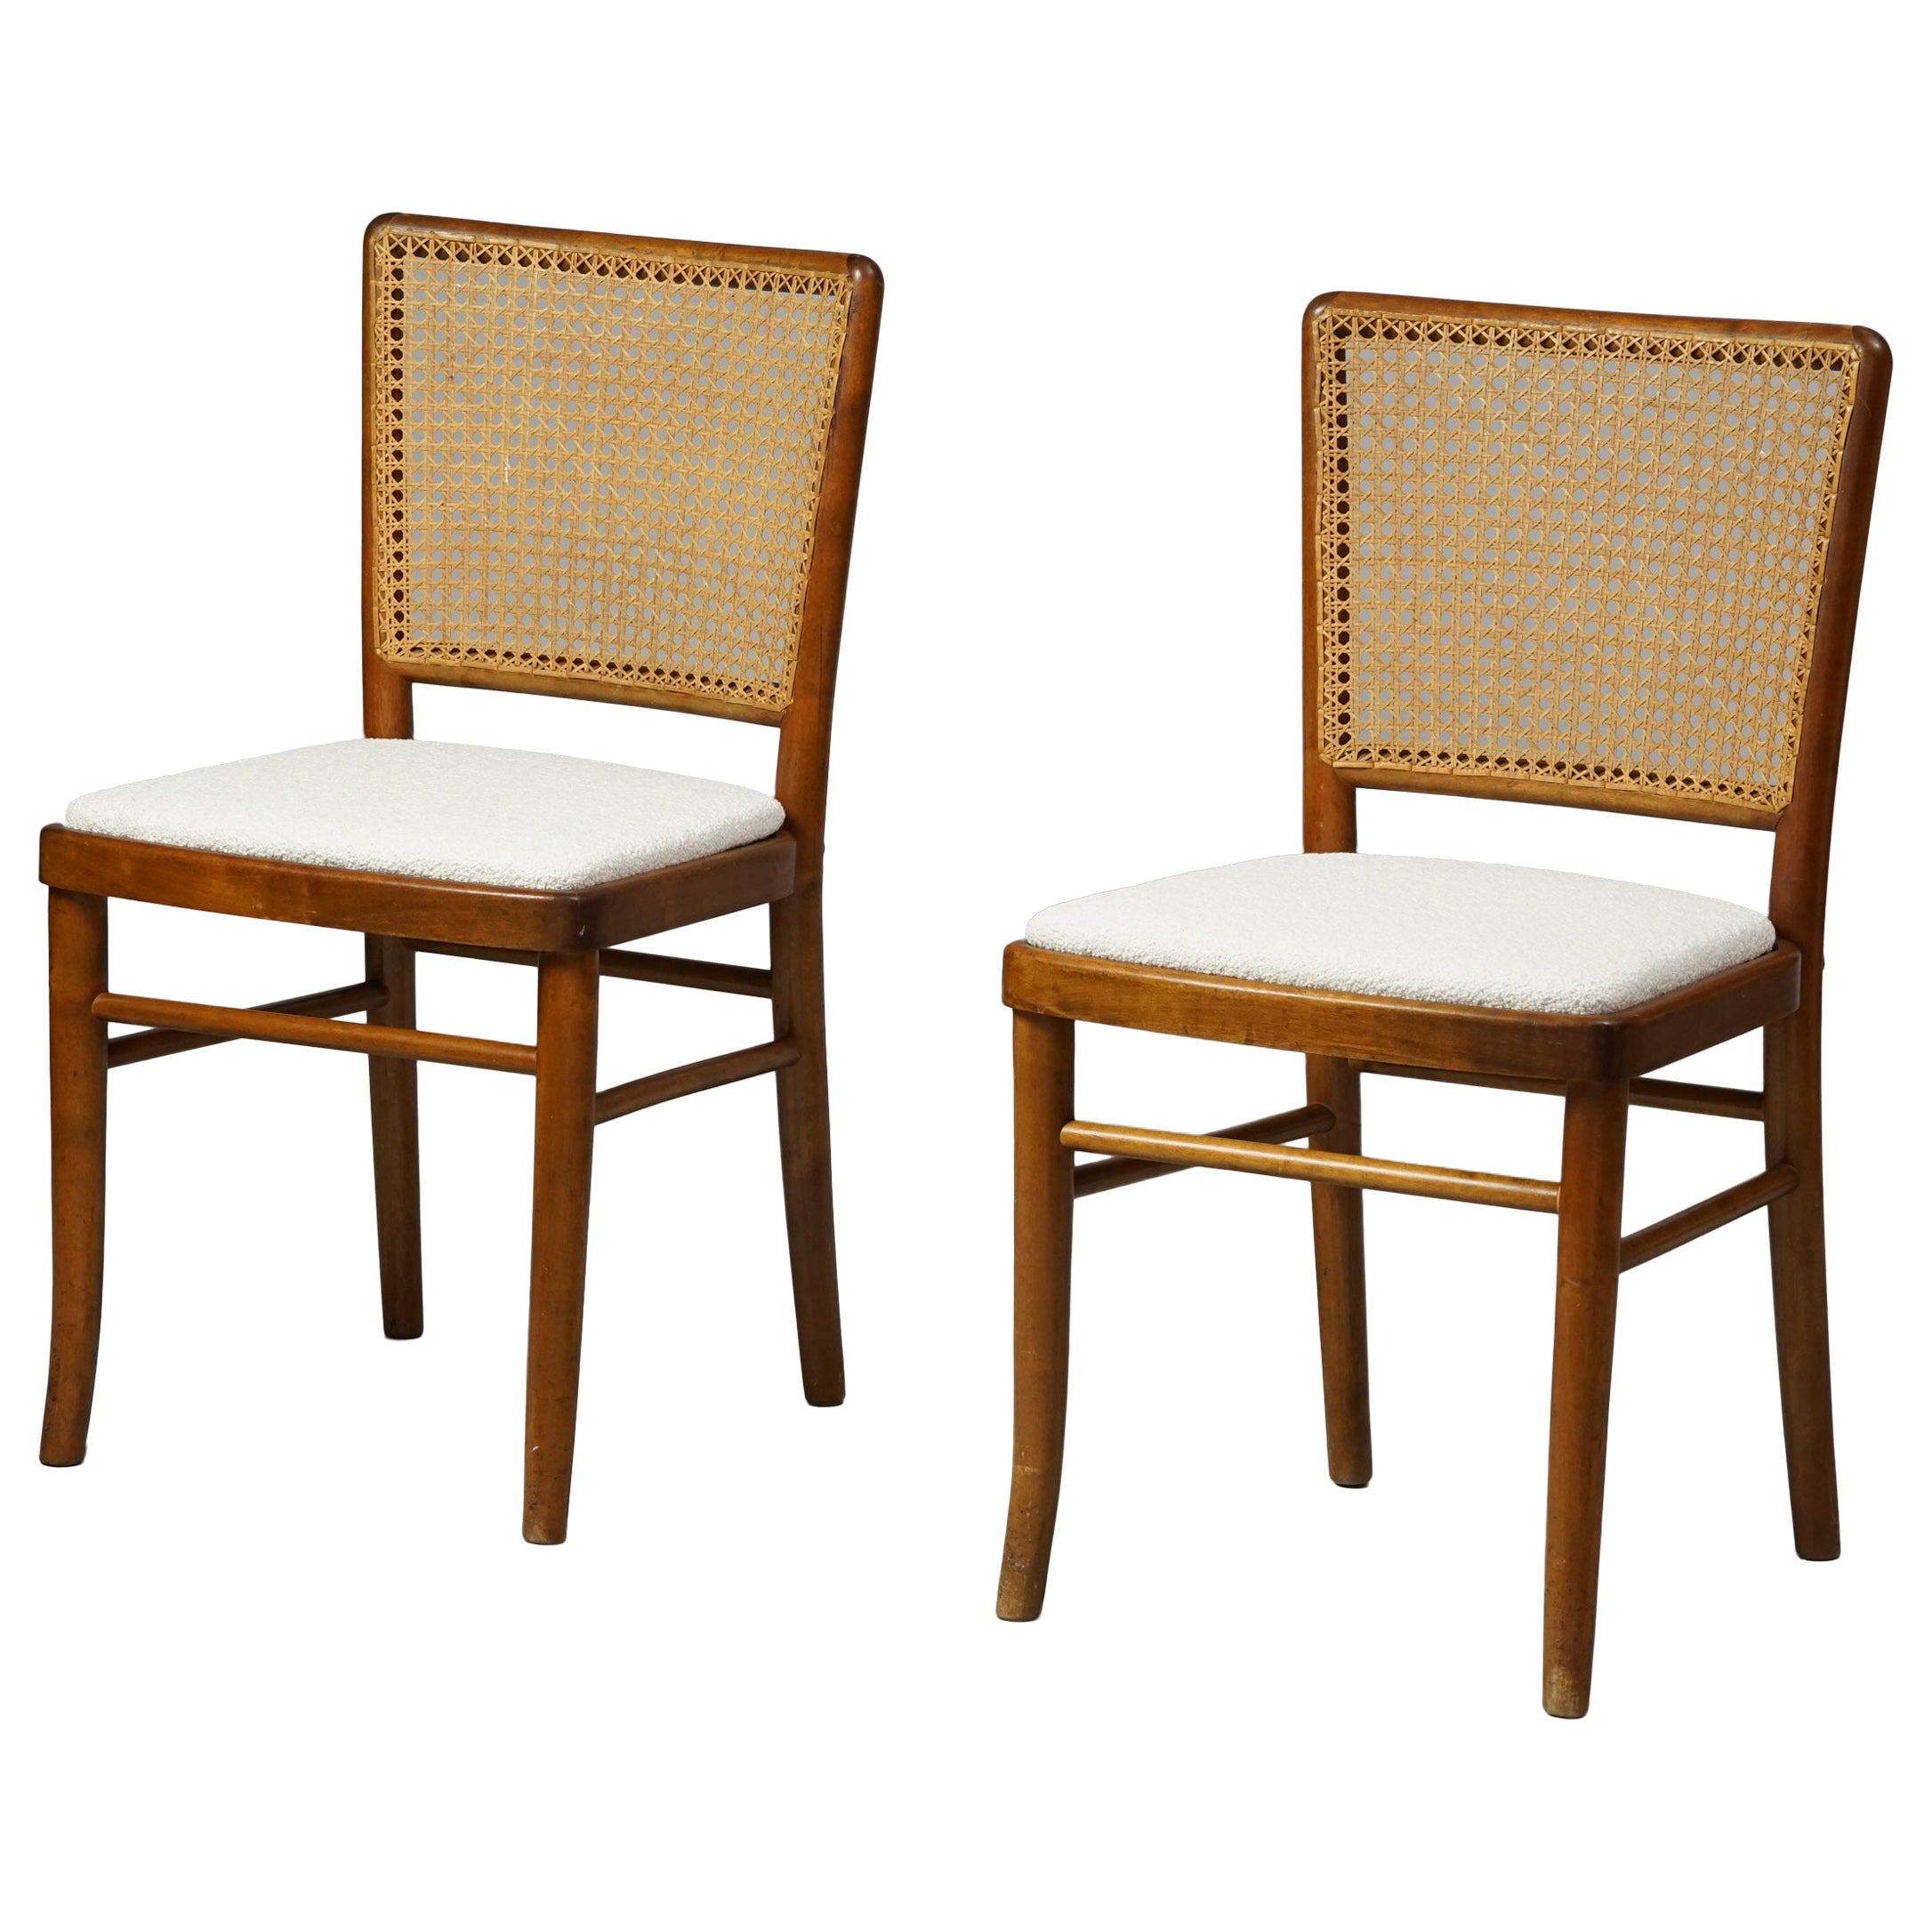 Set of Two Finnish Birch and Rattan Chairs Produced by Wilhelm Schauman